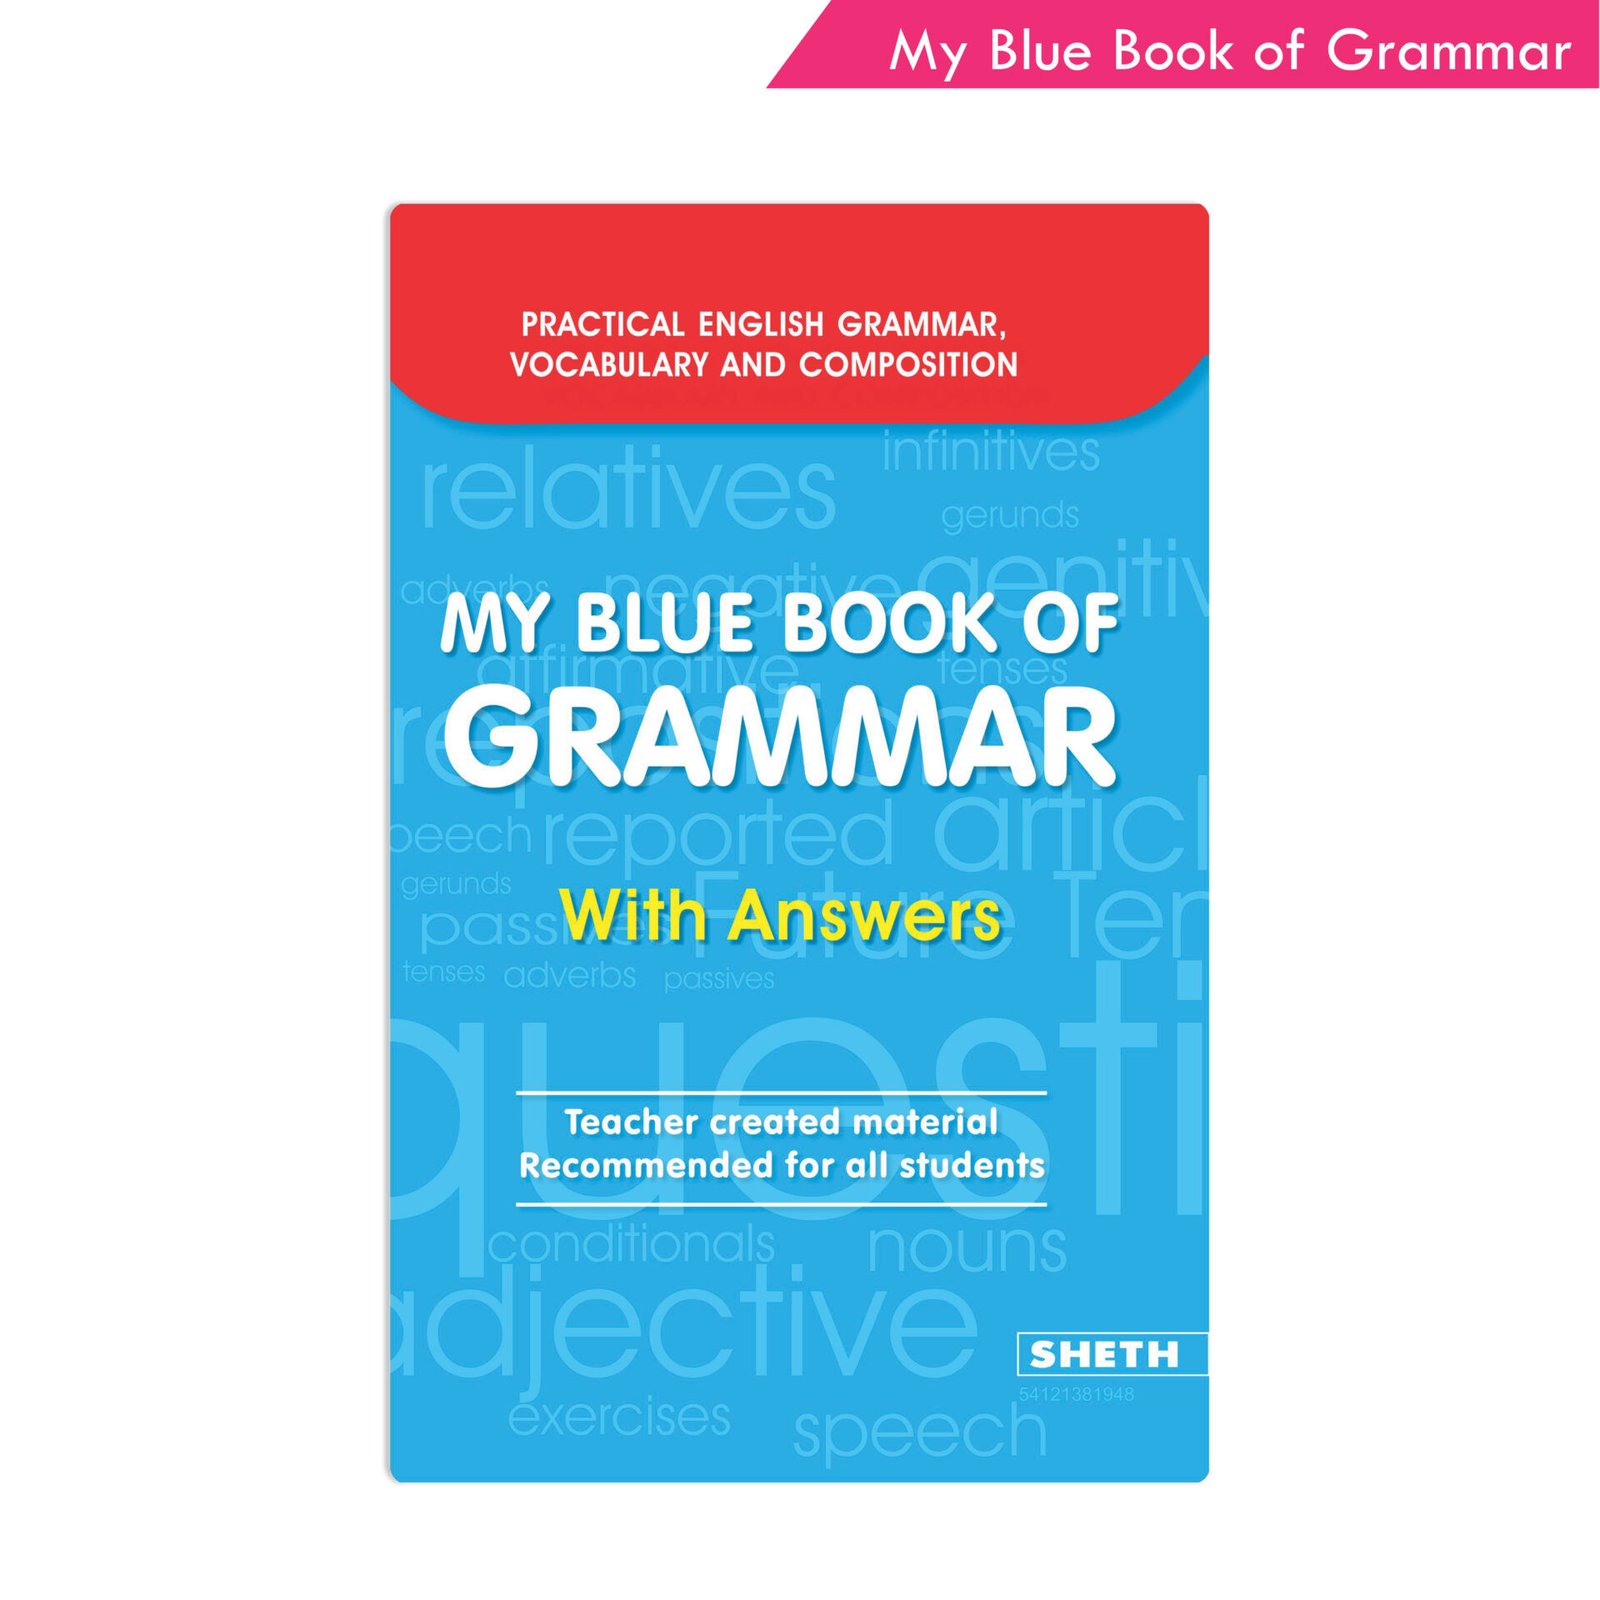 english-grammar-book-for-class-5-shethbooks-official-buy-page-of